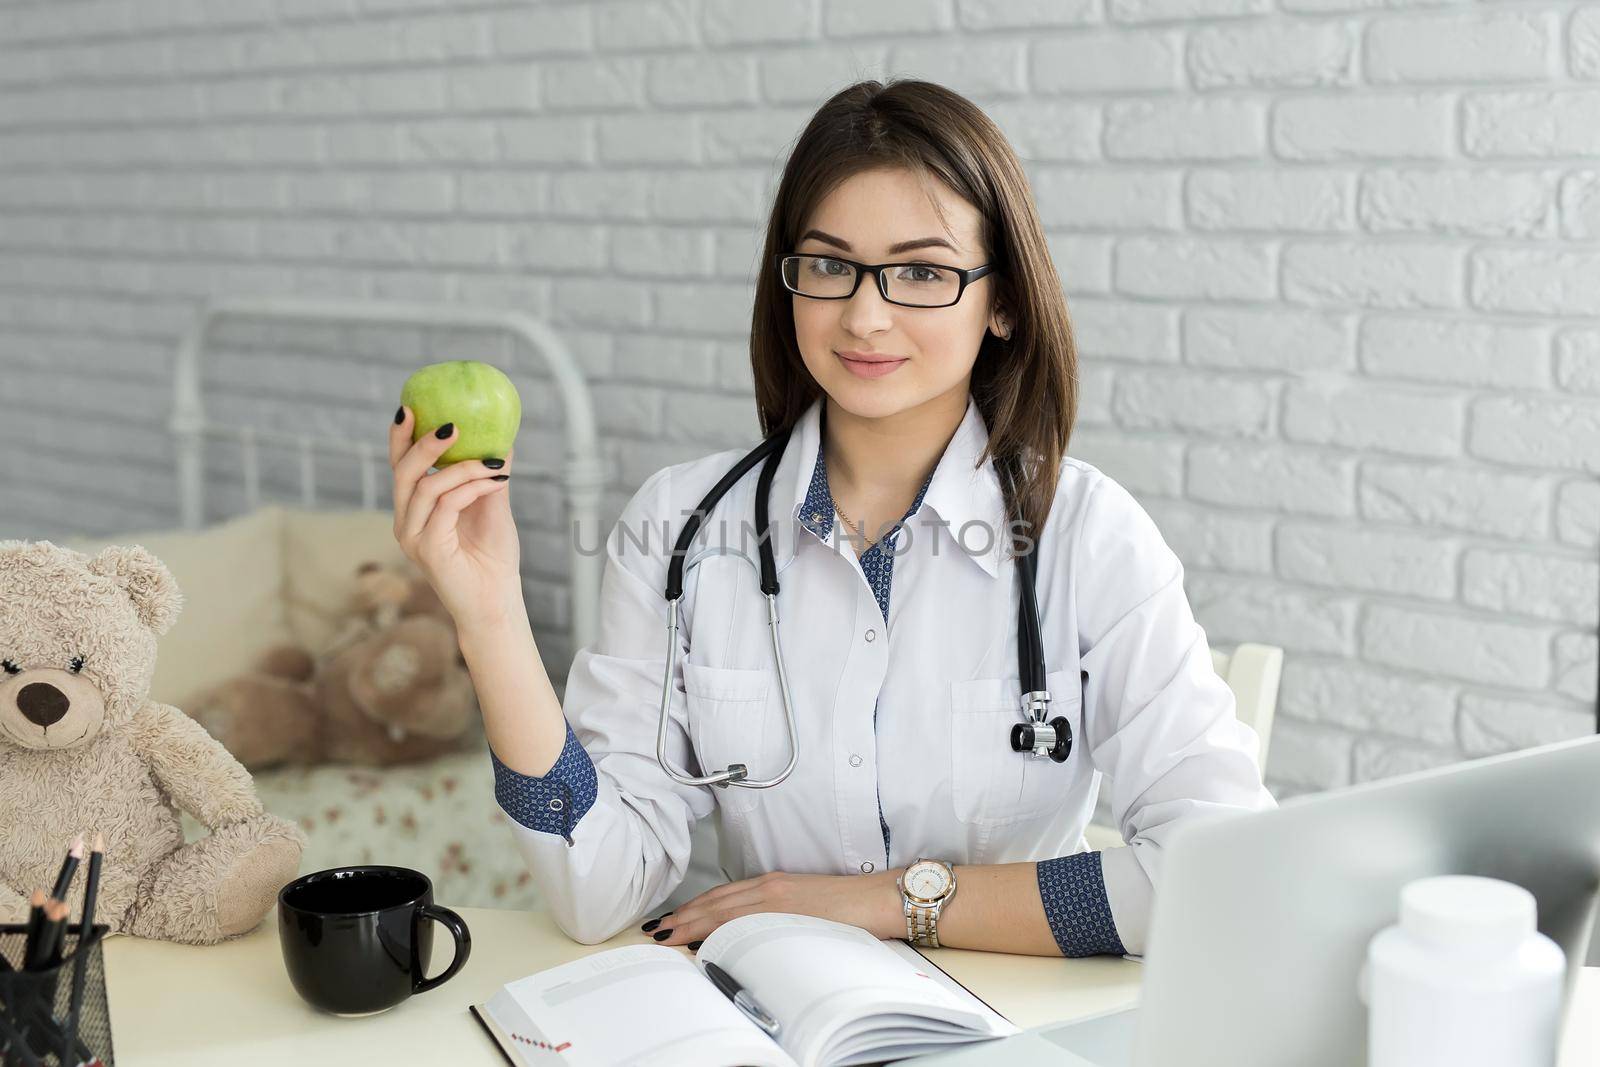 Portert smiling medical doctor woman with apple. by StudioPeace